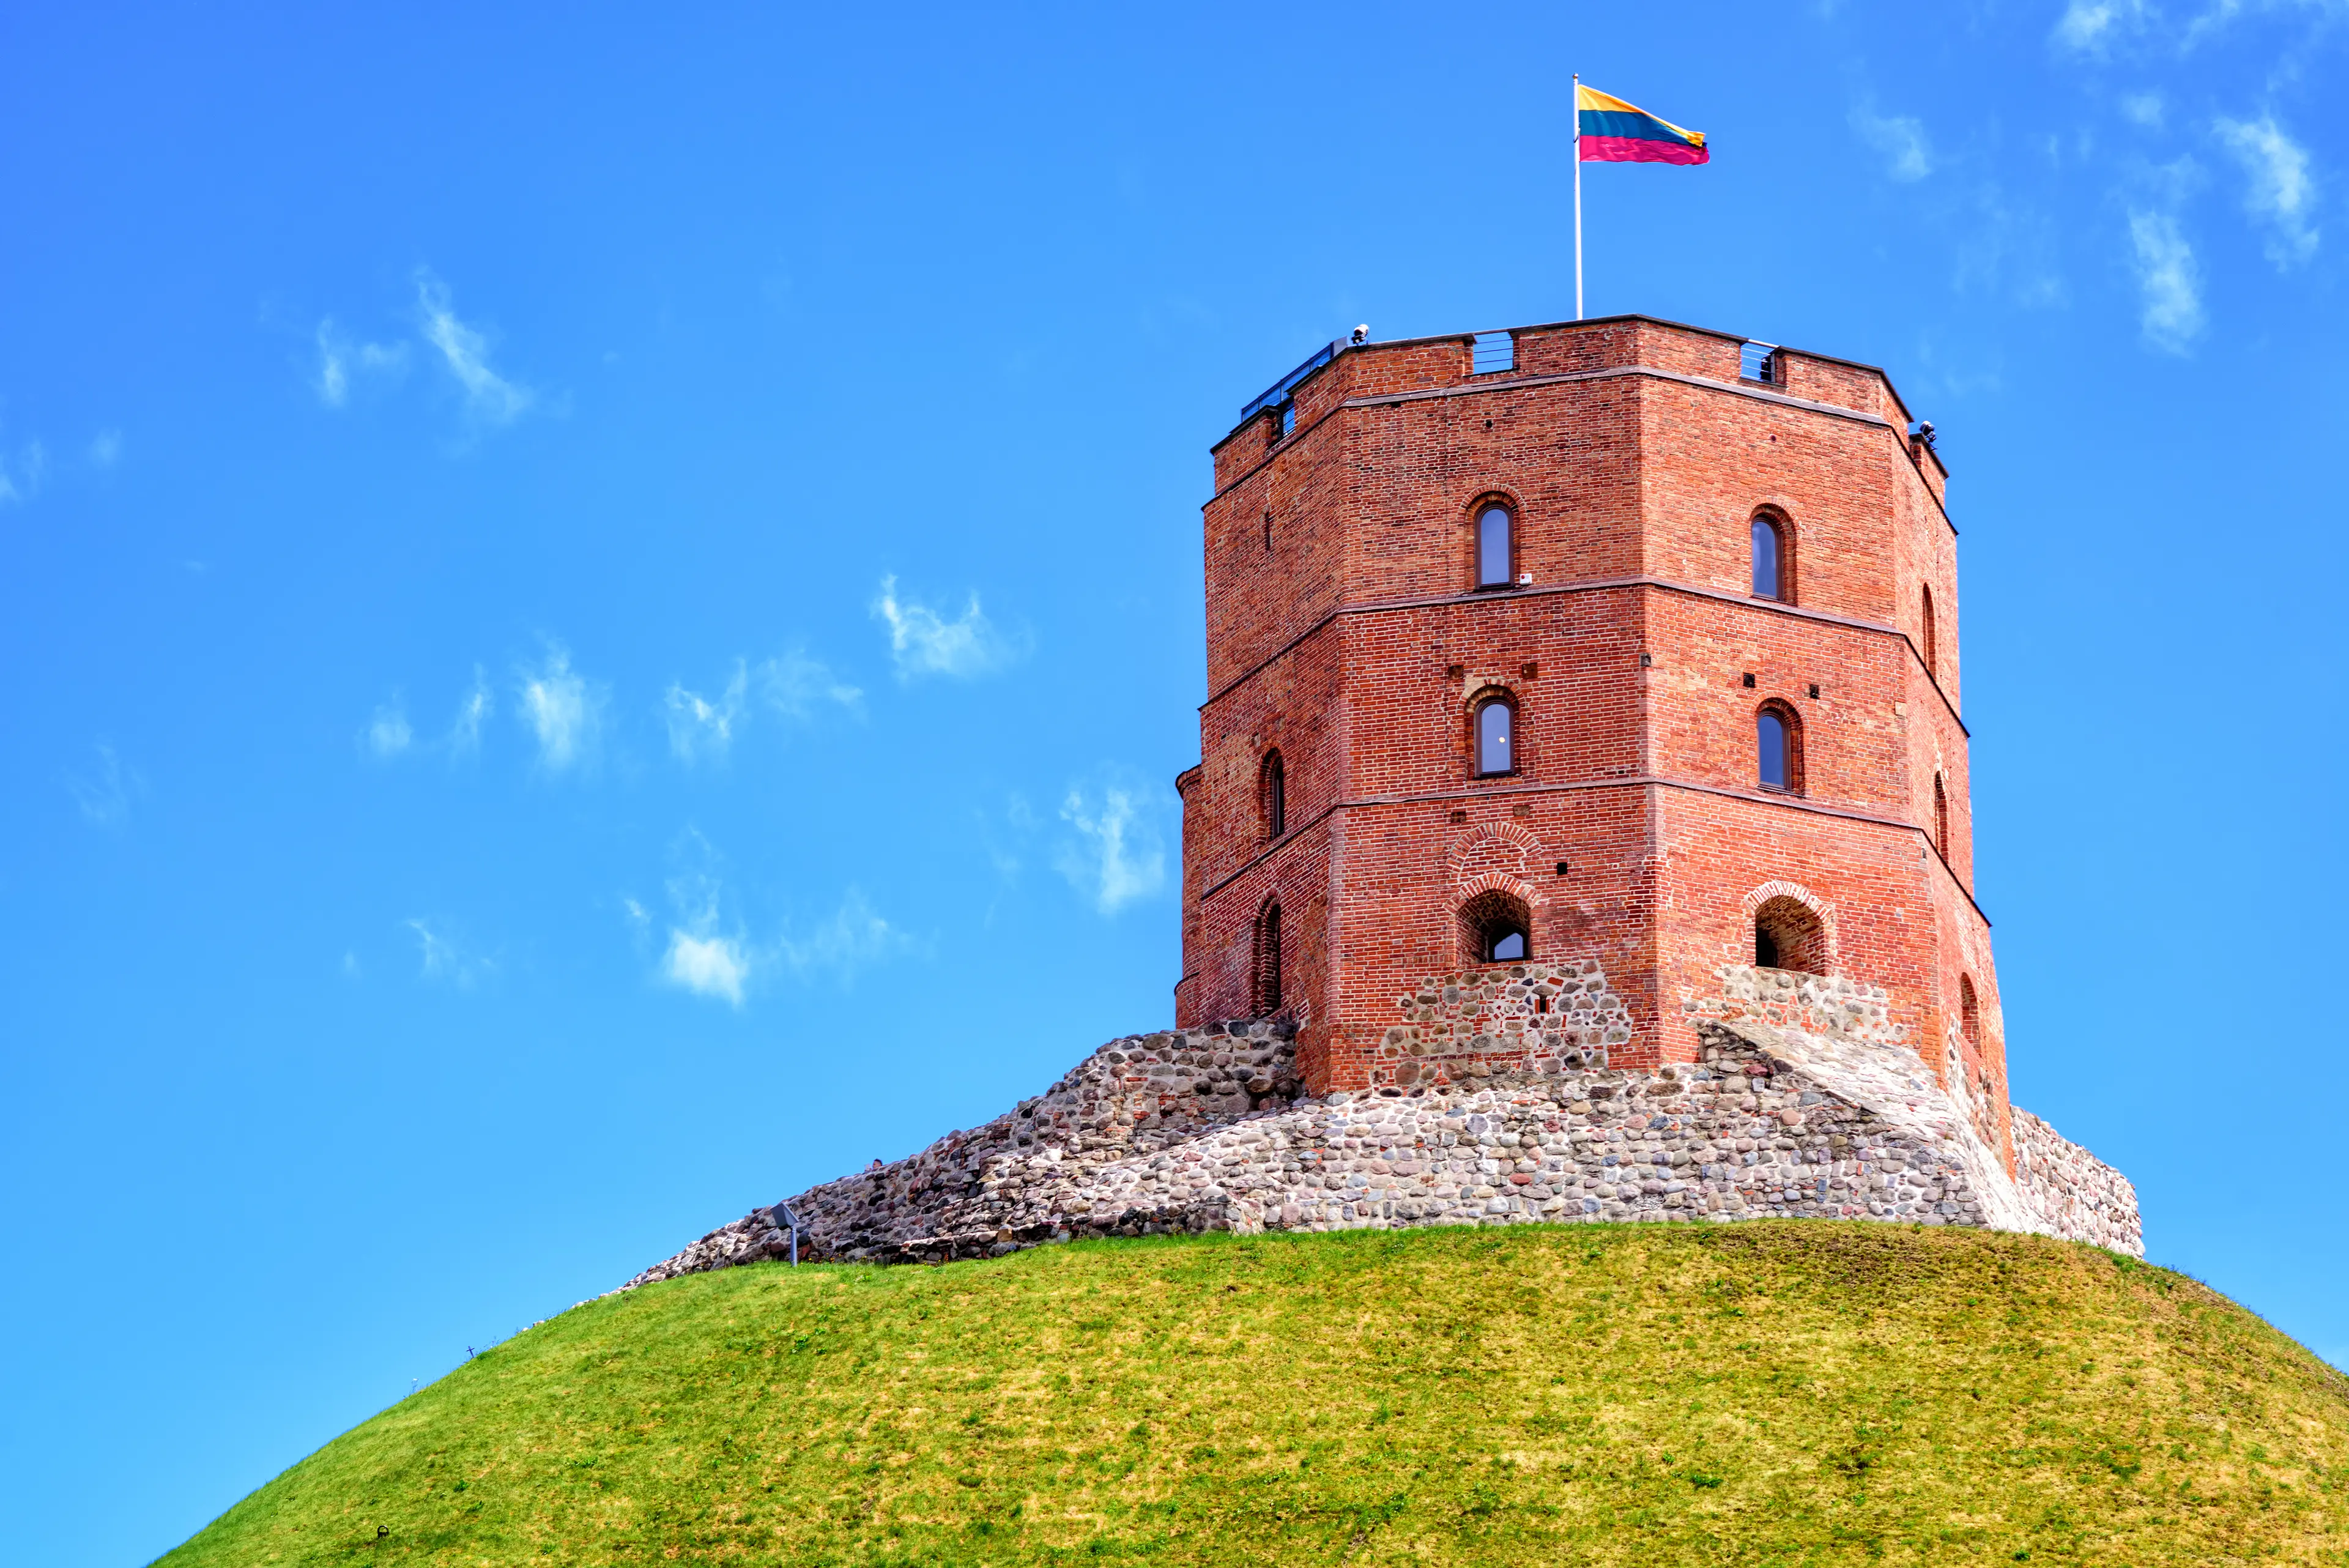 1-Day Family Adventure: Sightseeing, Shopping & Relaxing in Vilnius